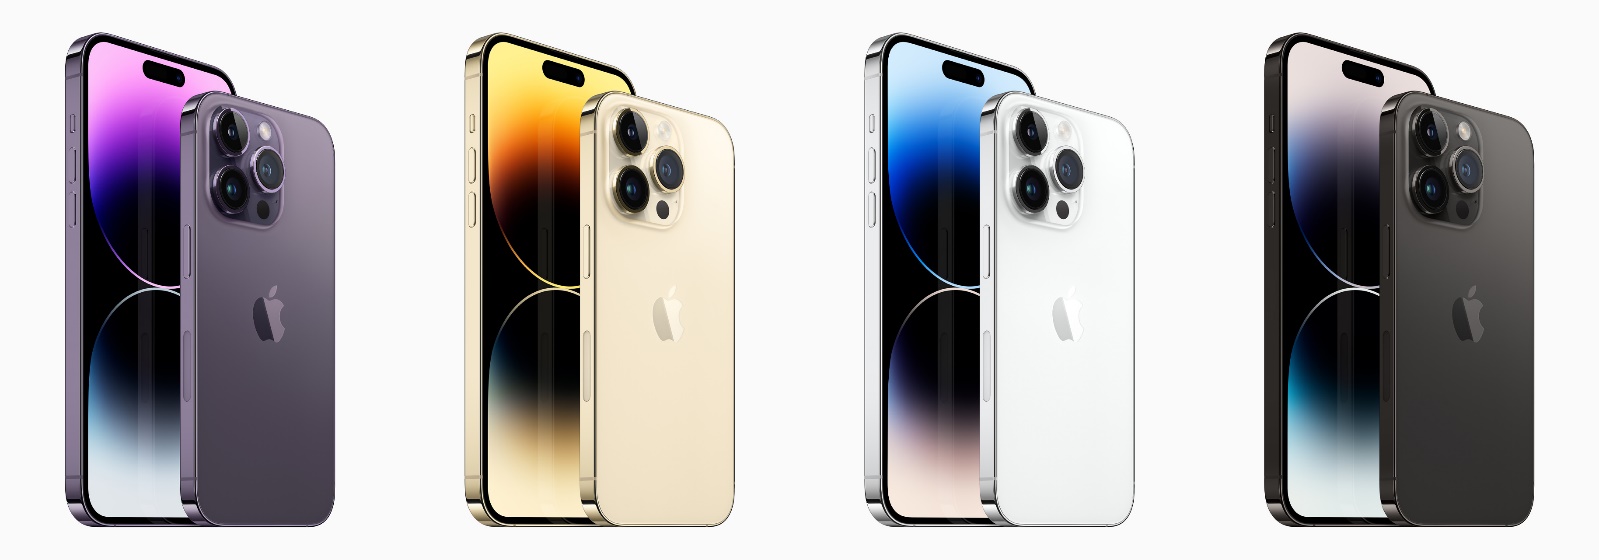 Apple's iPhone 14 Pro Max and iPhone 14 Pro colors